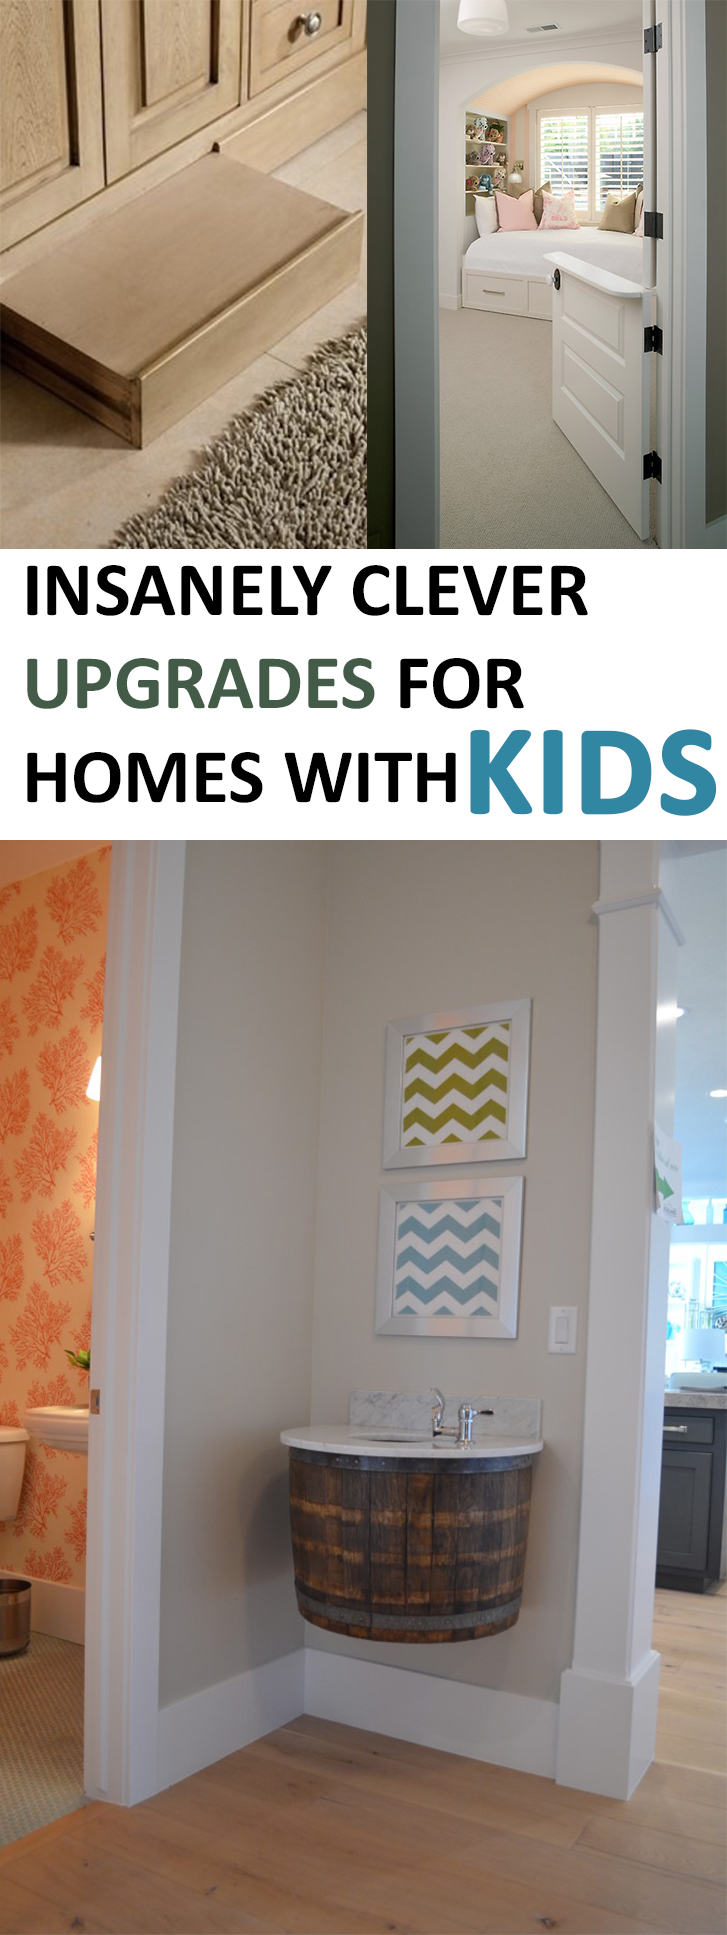 Insanely Clever Upgrades for Homes with Kids